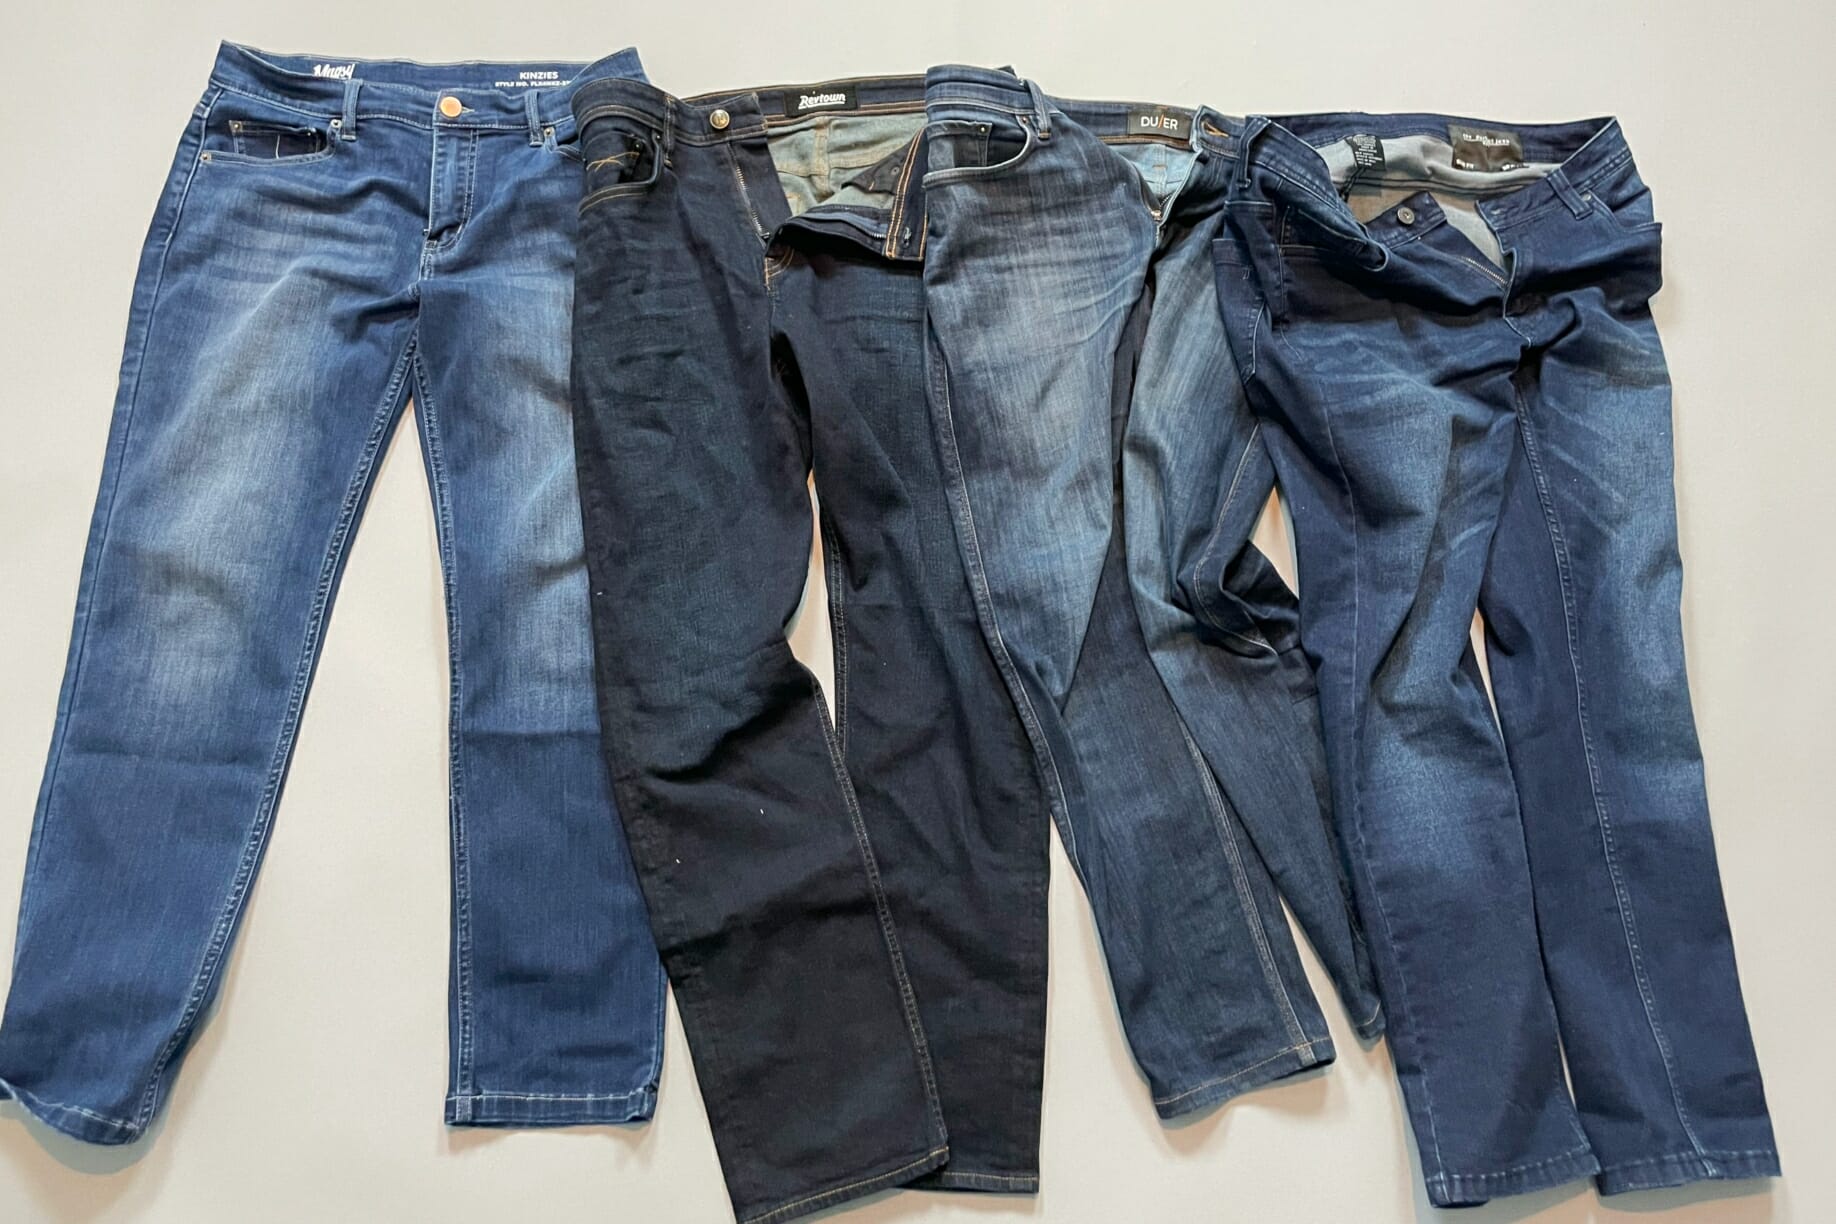 Featured image for “The Best Mens Jeans: 5 You’ve (Probably) Never Heard Of”